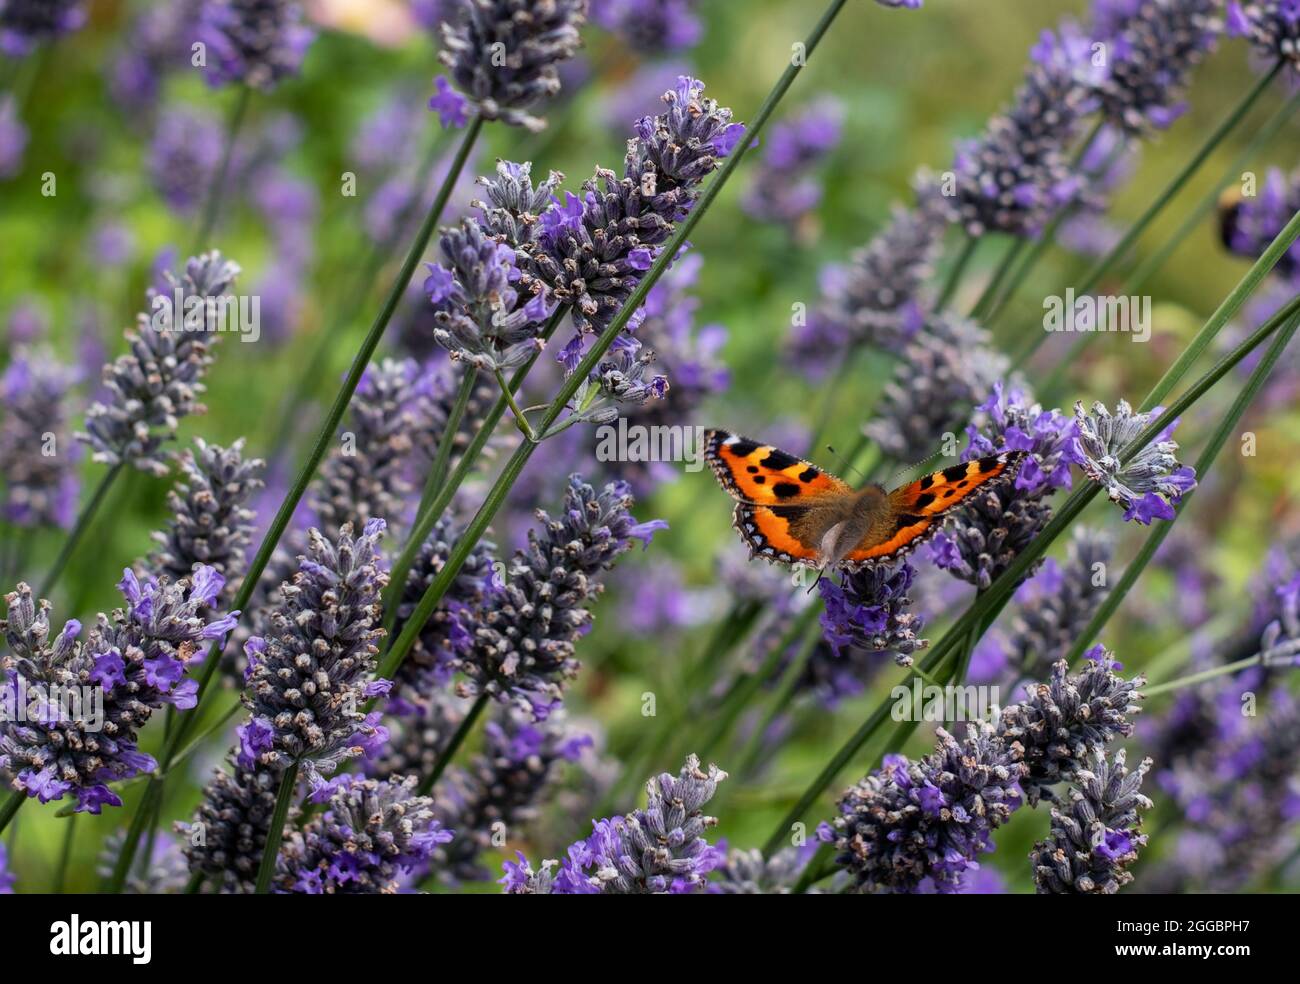 Admiral butterfly lands on lavender flowers in a garden near Bourton-on-the-Hill in the Cotswolds, Gloucestershire, UK. Stock Photo